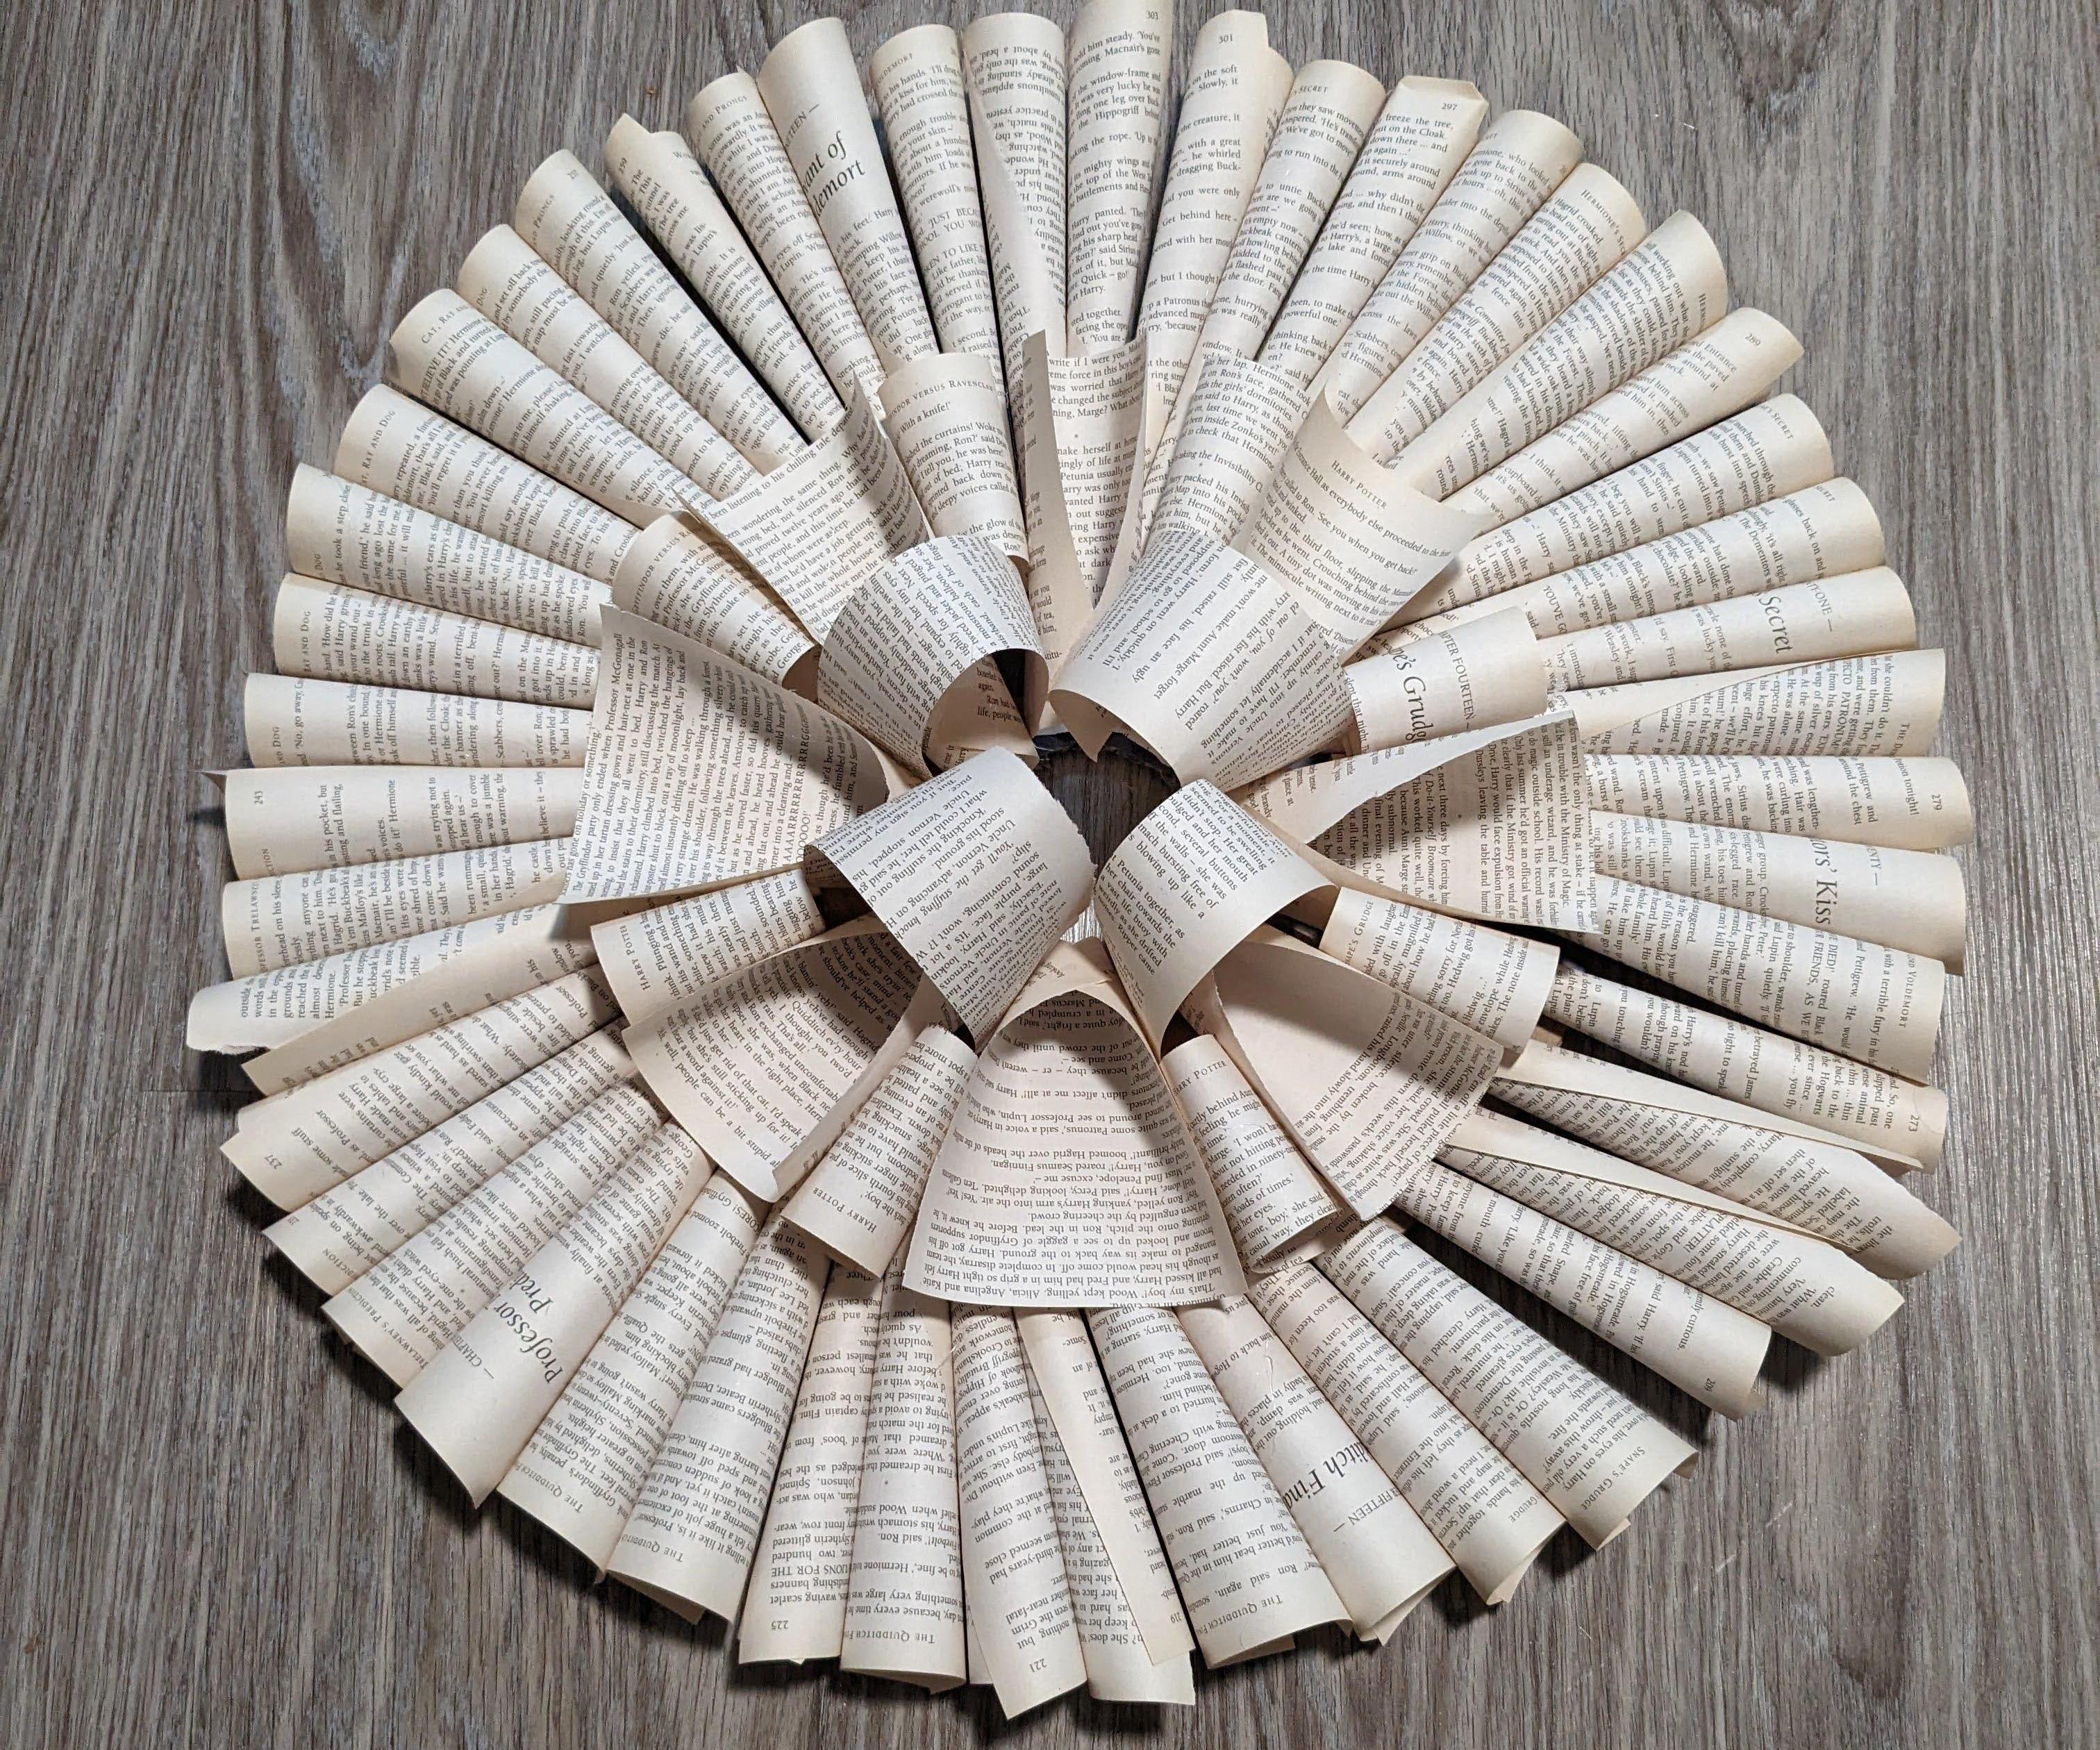 Easy Wreath From Old Books in 5 Steps